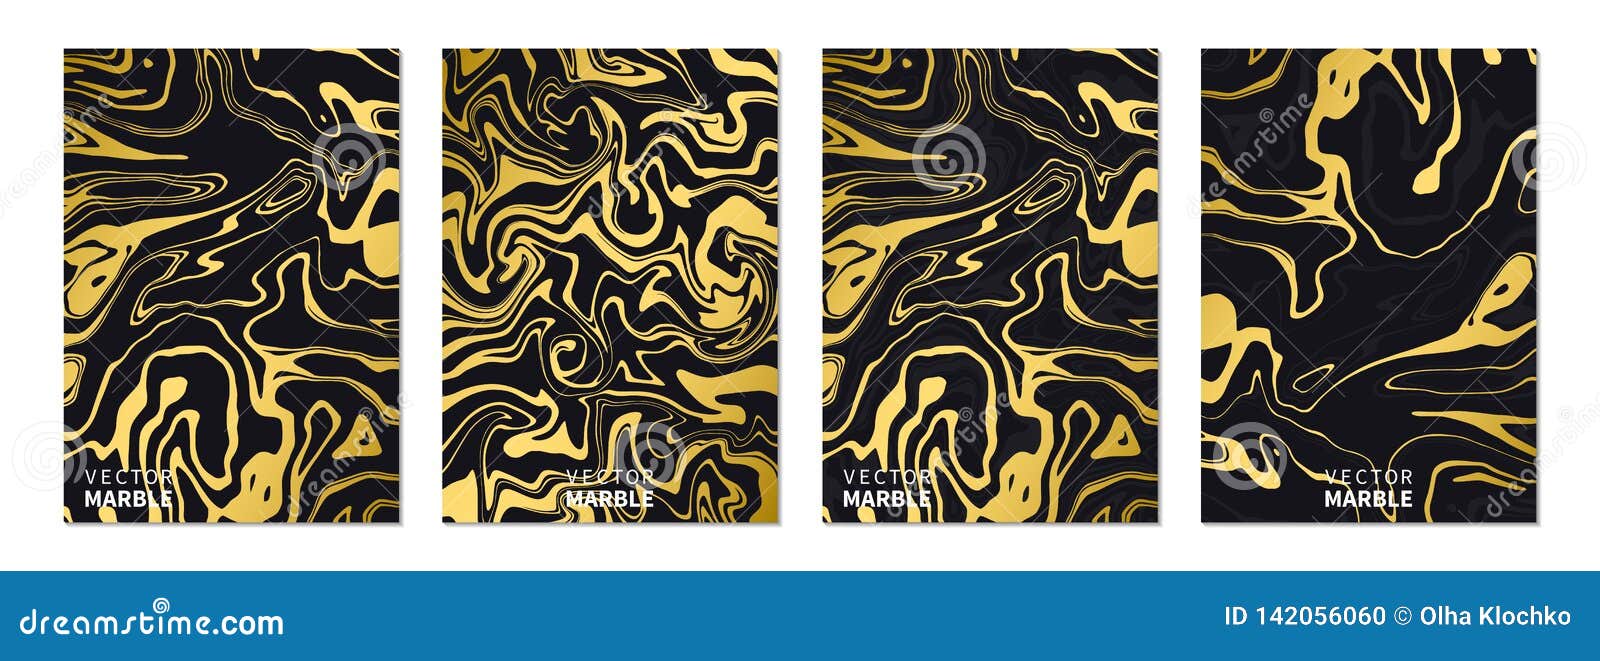 liquid marble texture in gold. vertical banners set with abstract background. golden dynamic fluid art splash. 